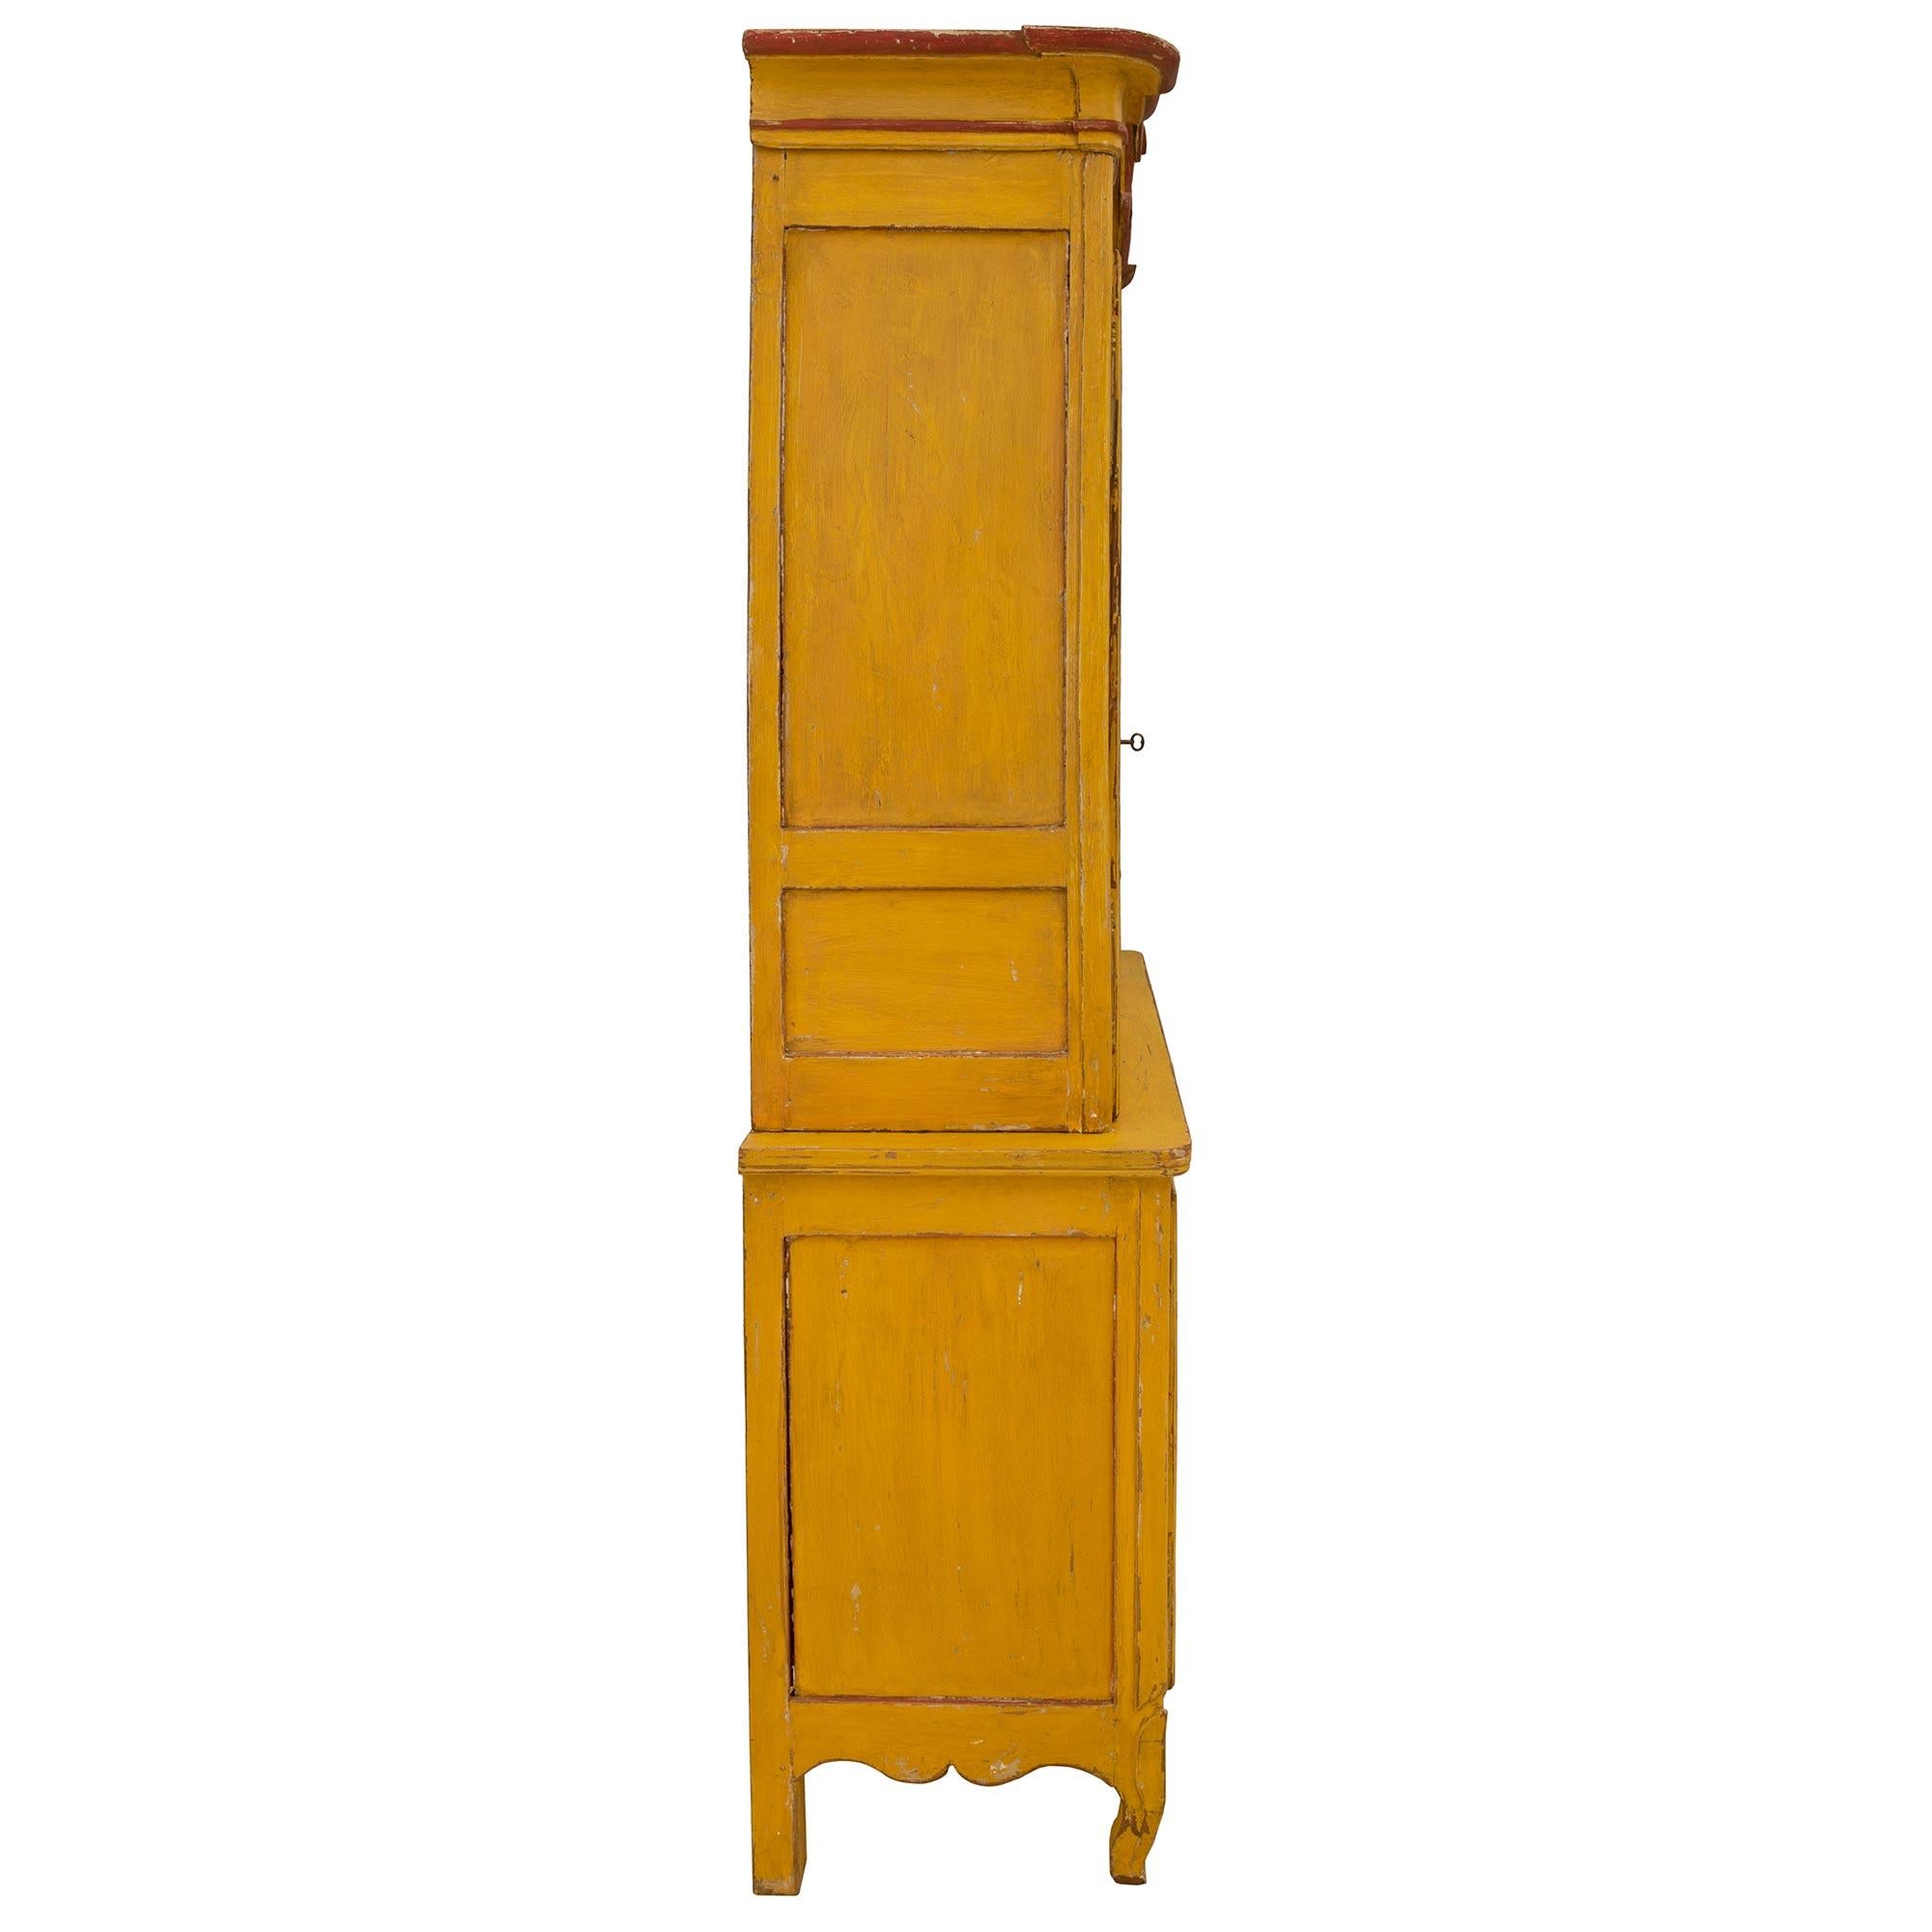 Italian 18th Century Louis XV Period Patinated Wood Deux-Corps Cabinet In Good Condition For Sale In West Palm Beach, FL